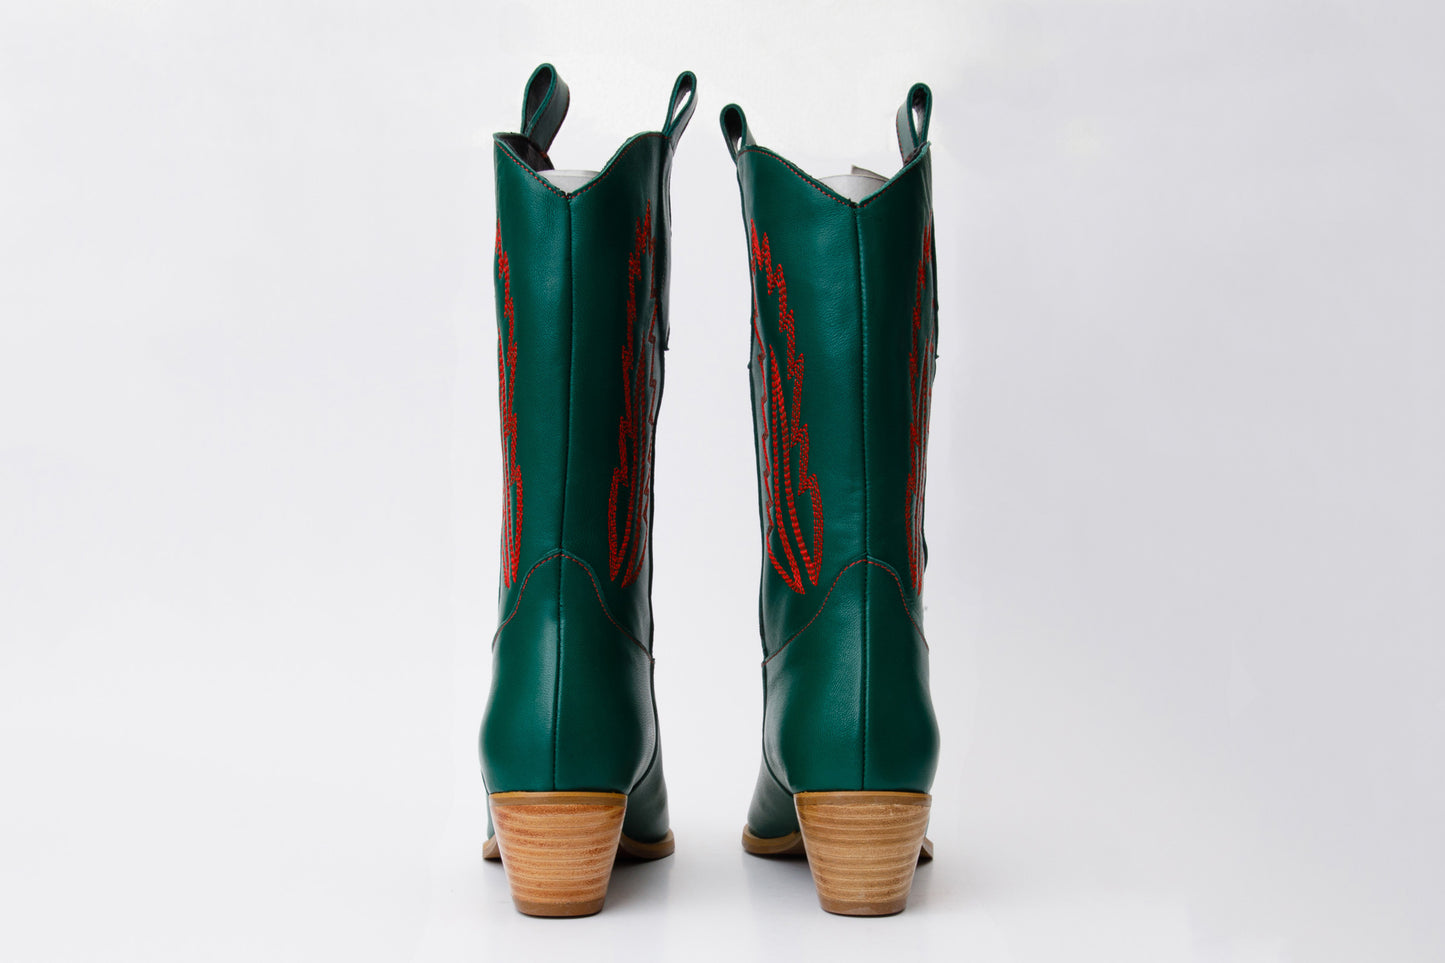 The Togg Green Leather Cowboy Women Boot